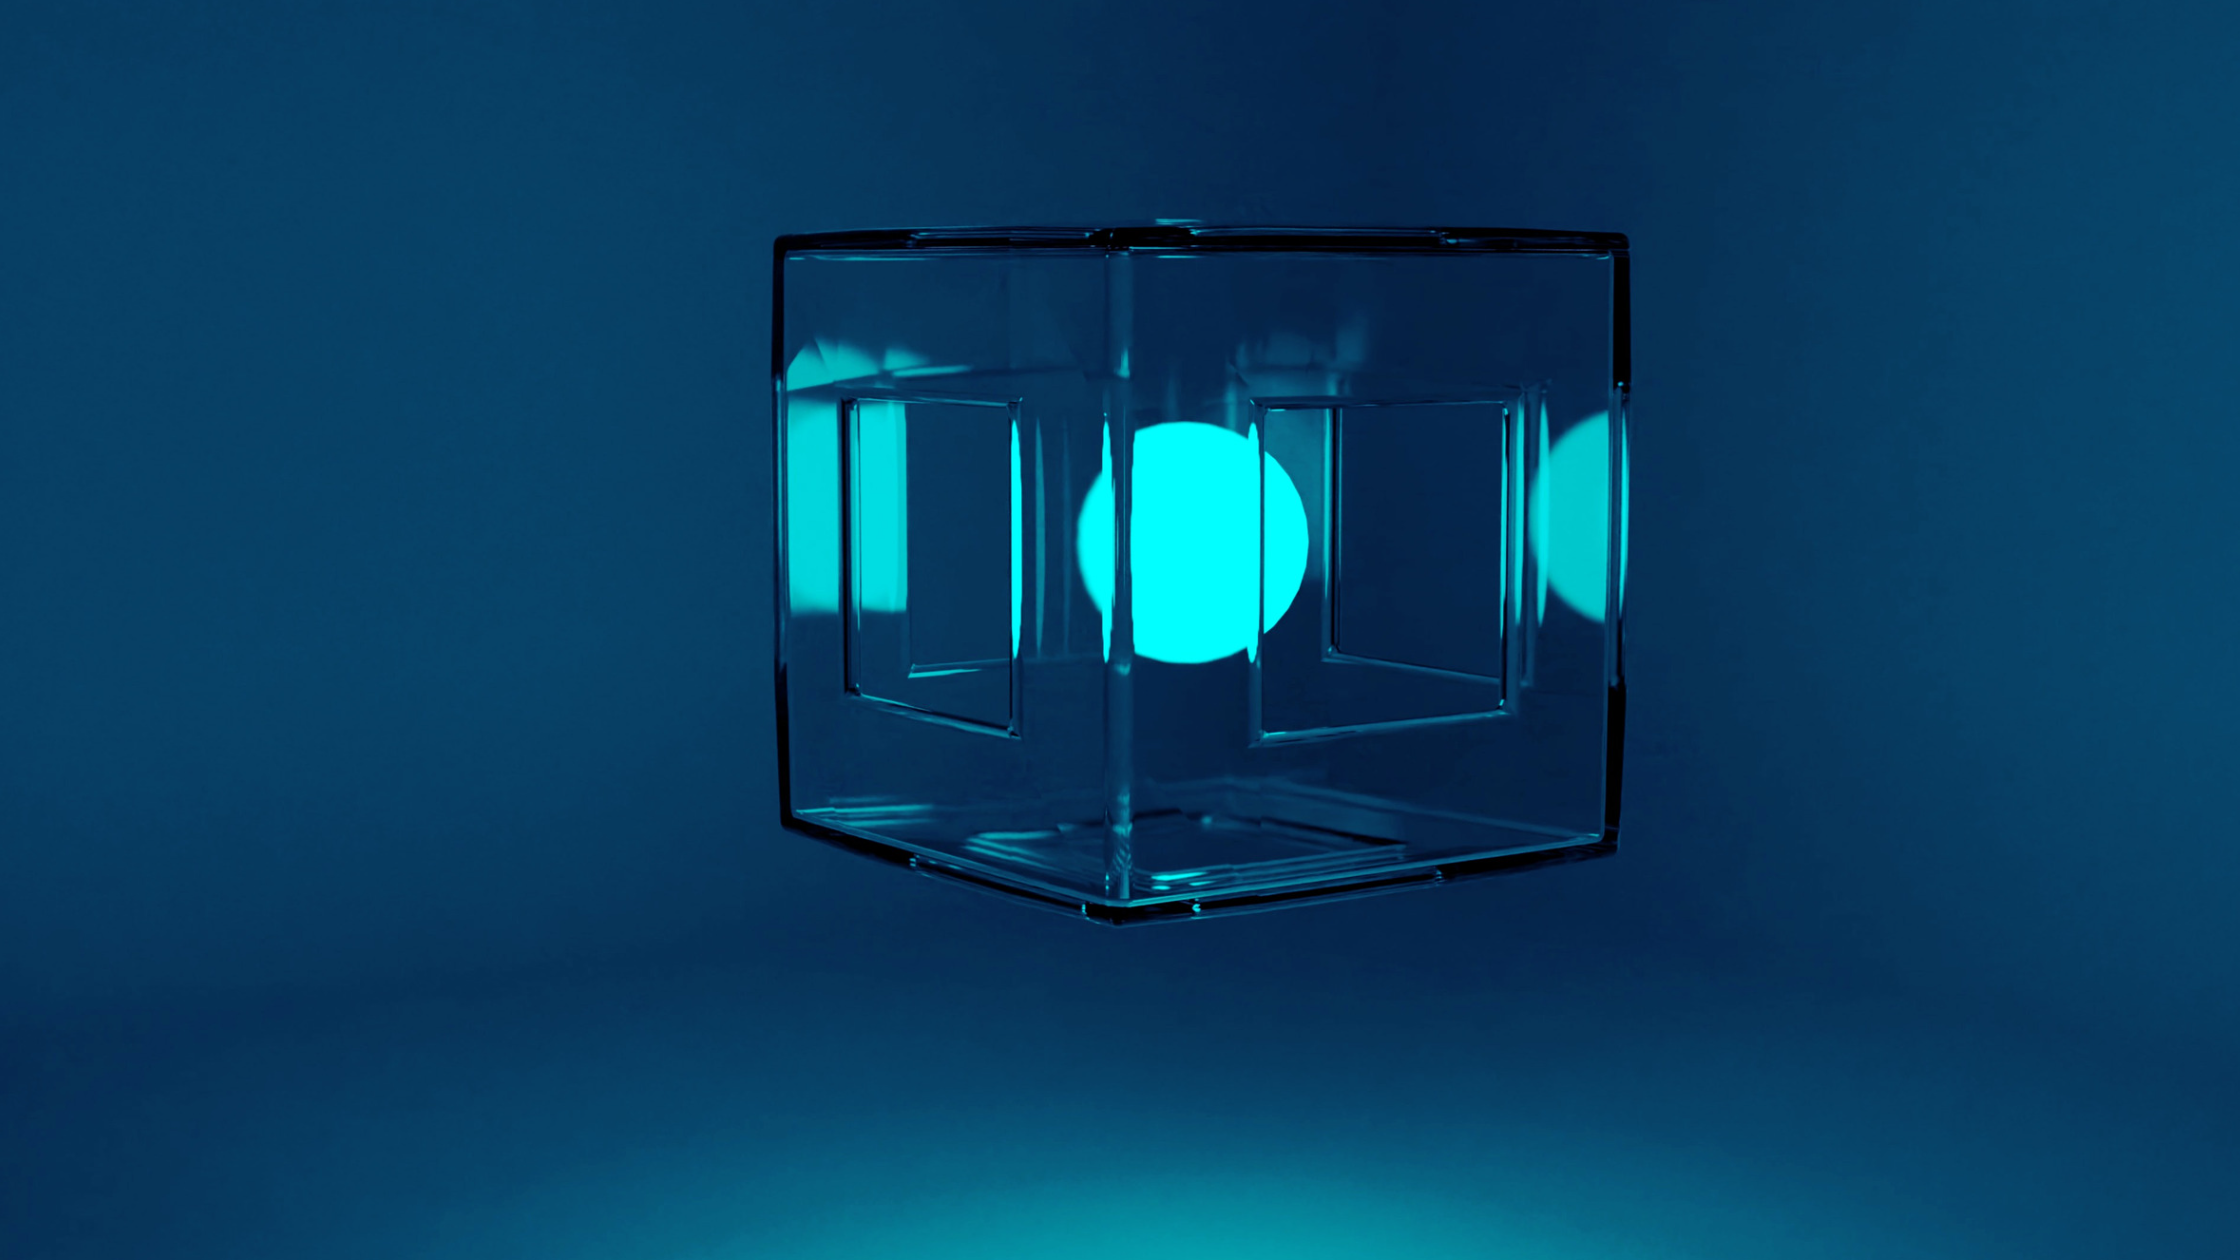 Glass cube with glowing ball in the center with teal tint overall